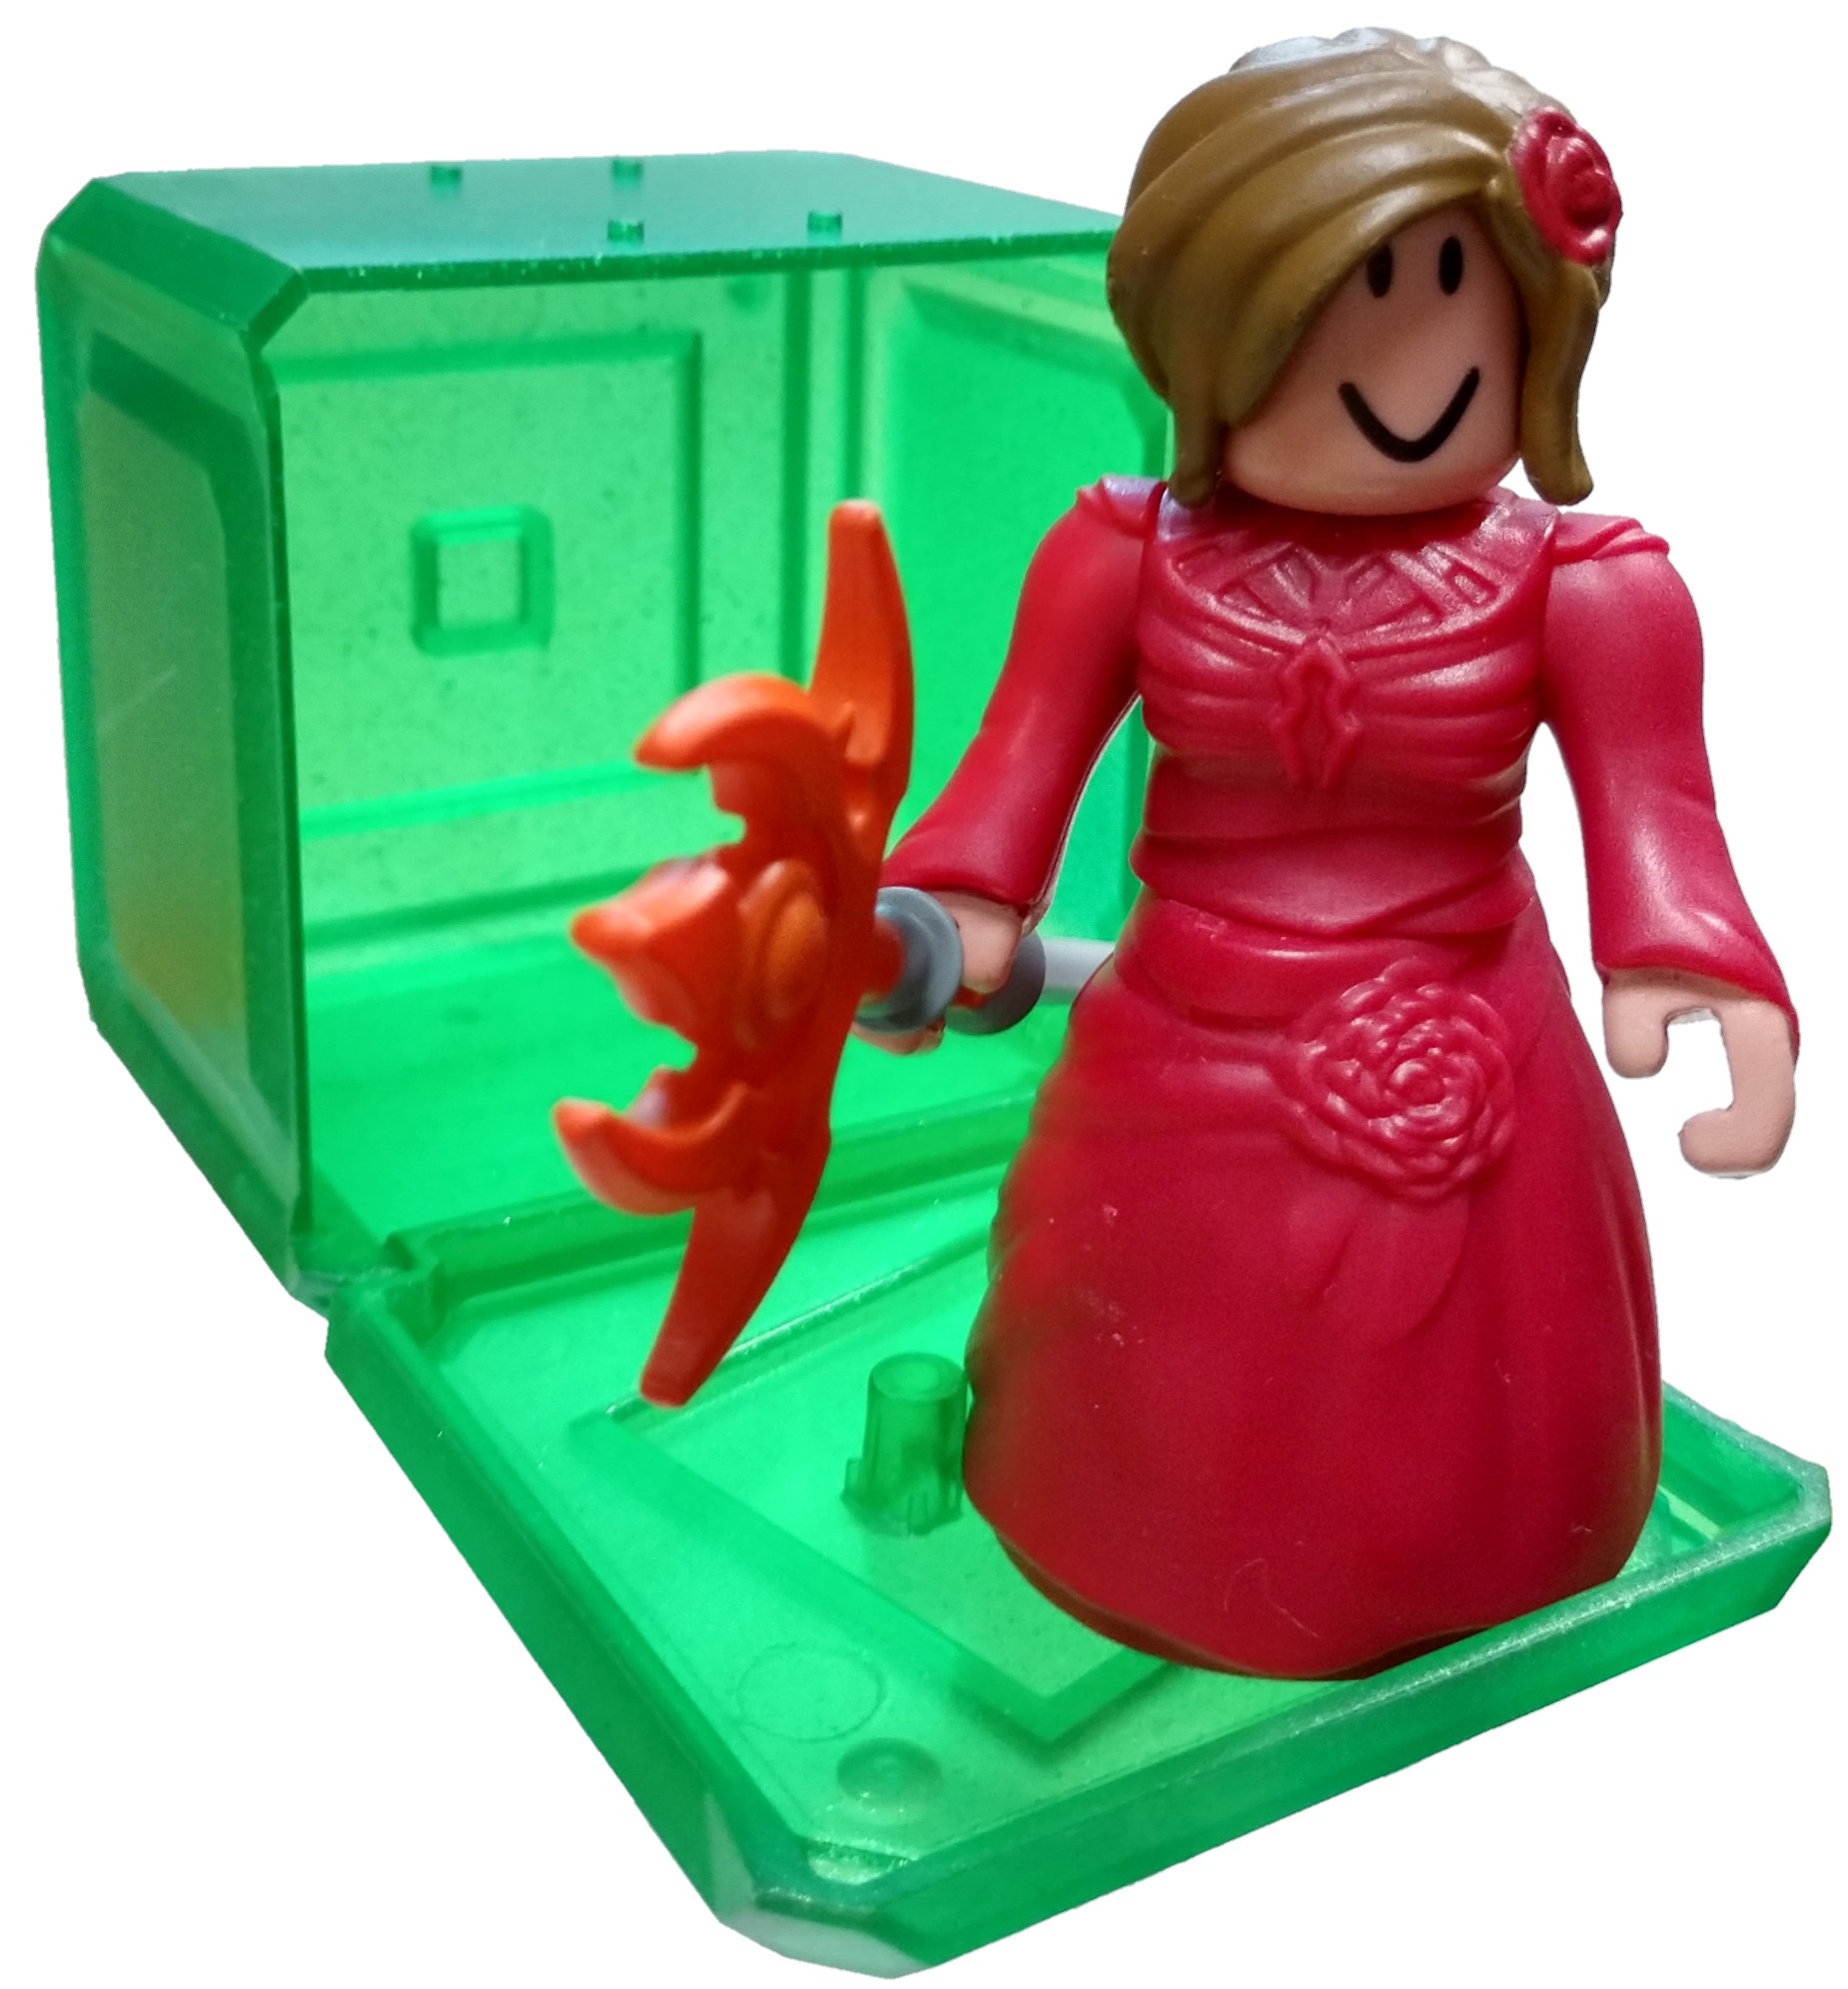 Roblox Celebrity Collection Series 4 Scarlet Sorceress Mini Figure 609411421680 Ebay - roblox celebrity collection series 4 mystery box green cube